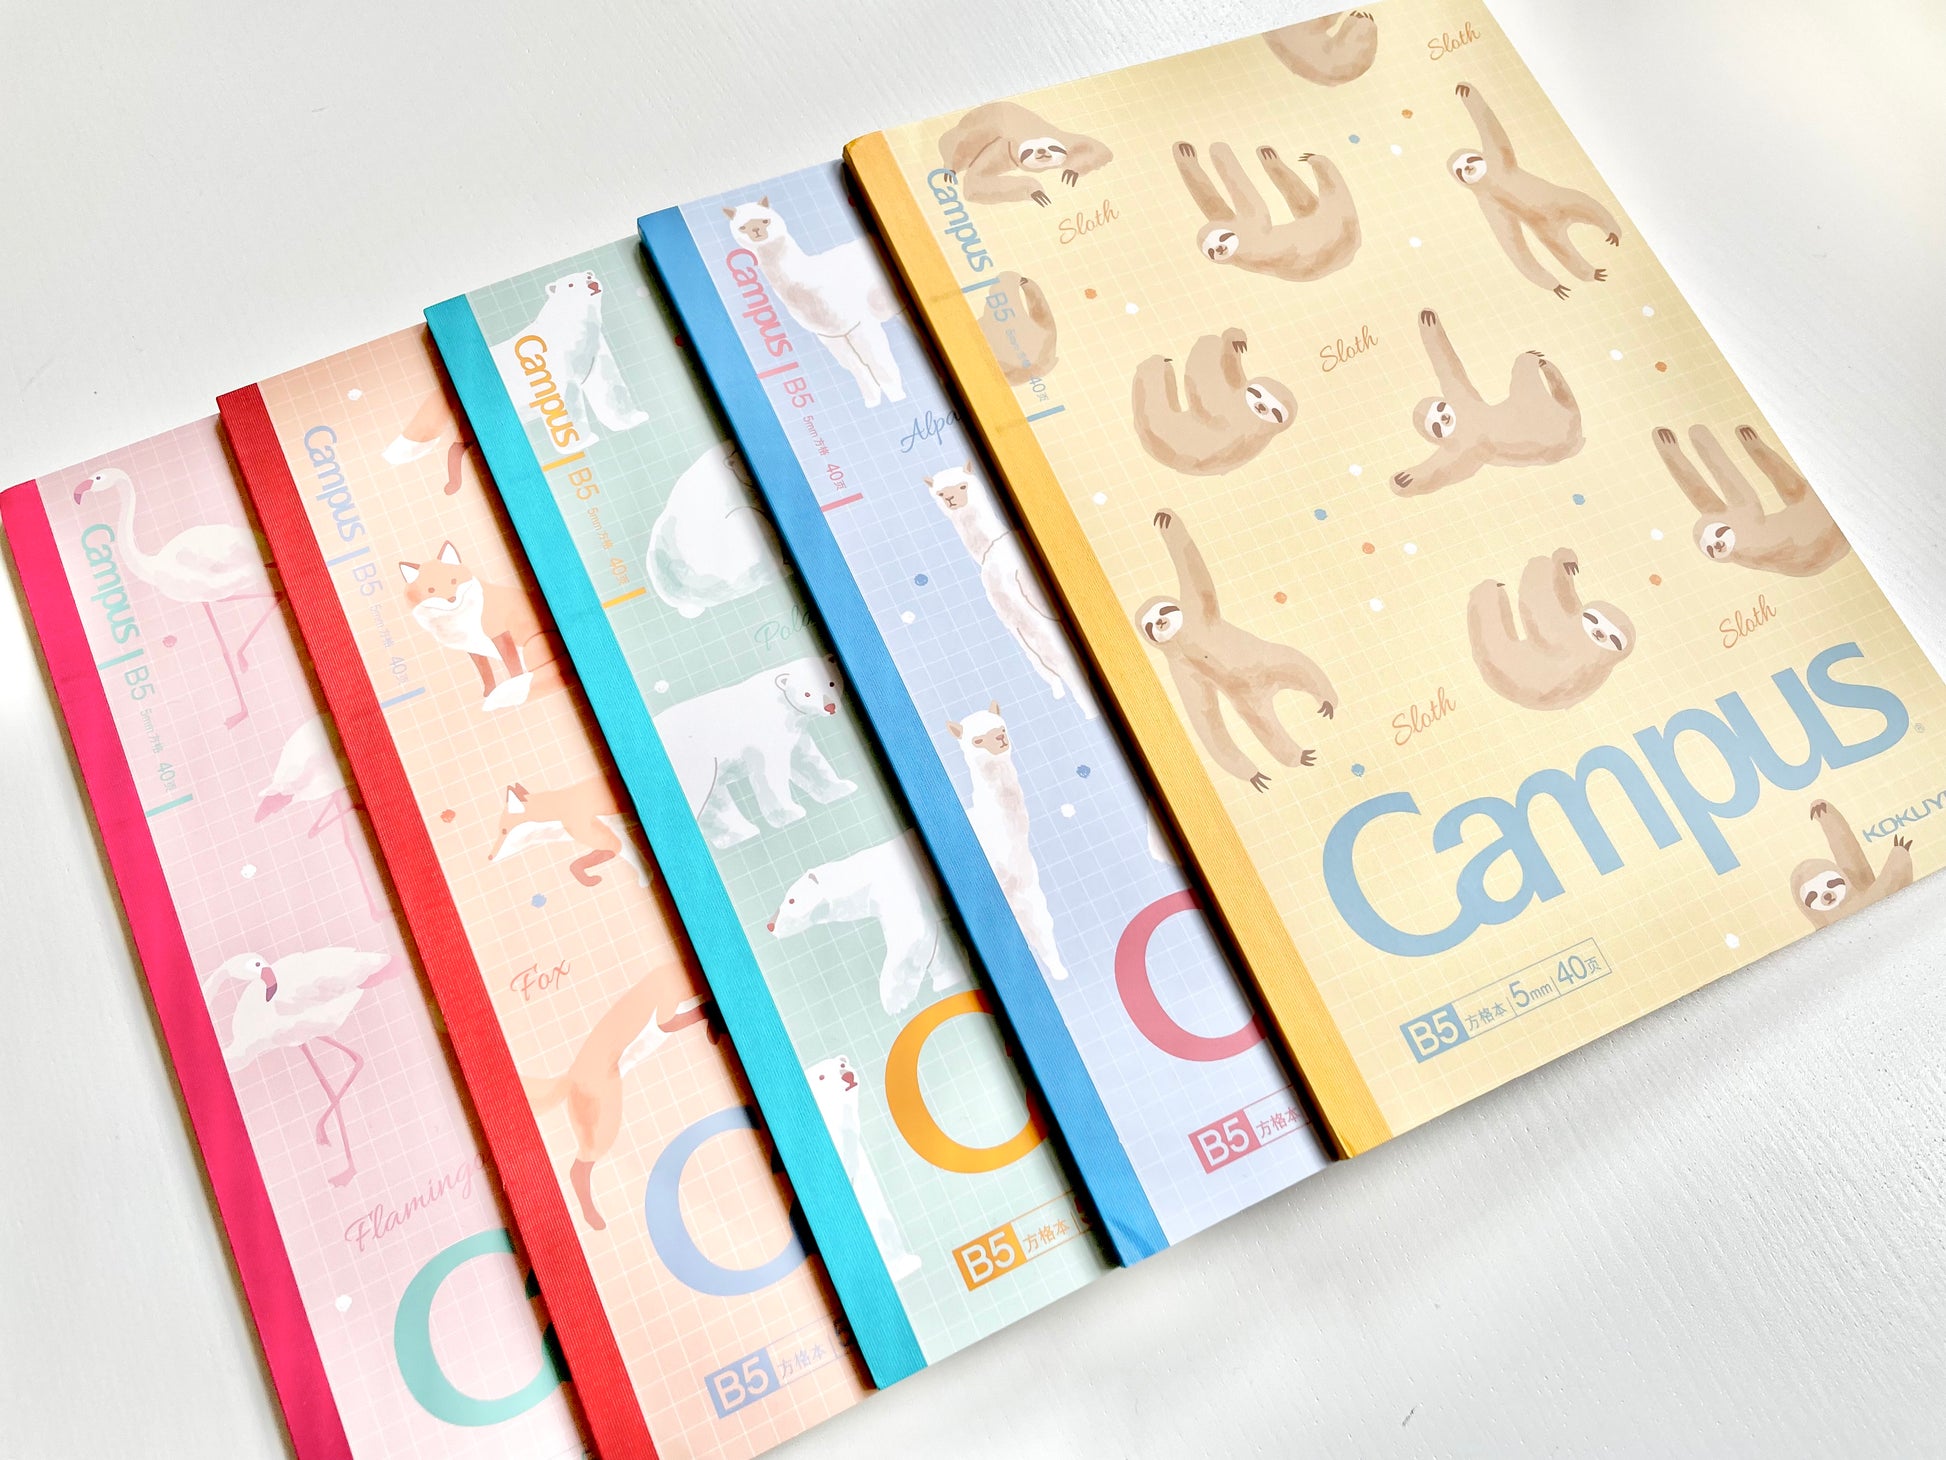 Coral & Ink’s Kawaii animal B5 notebooks for school, college and university